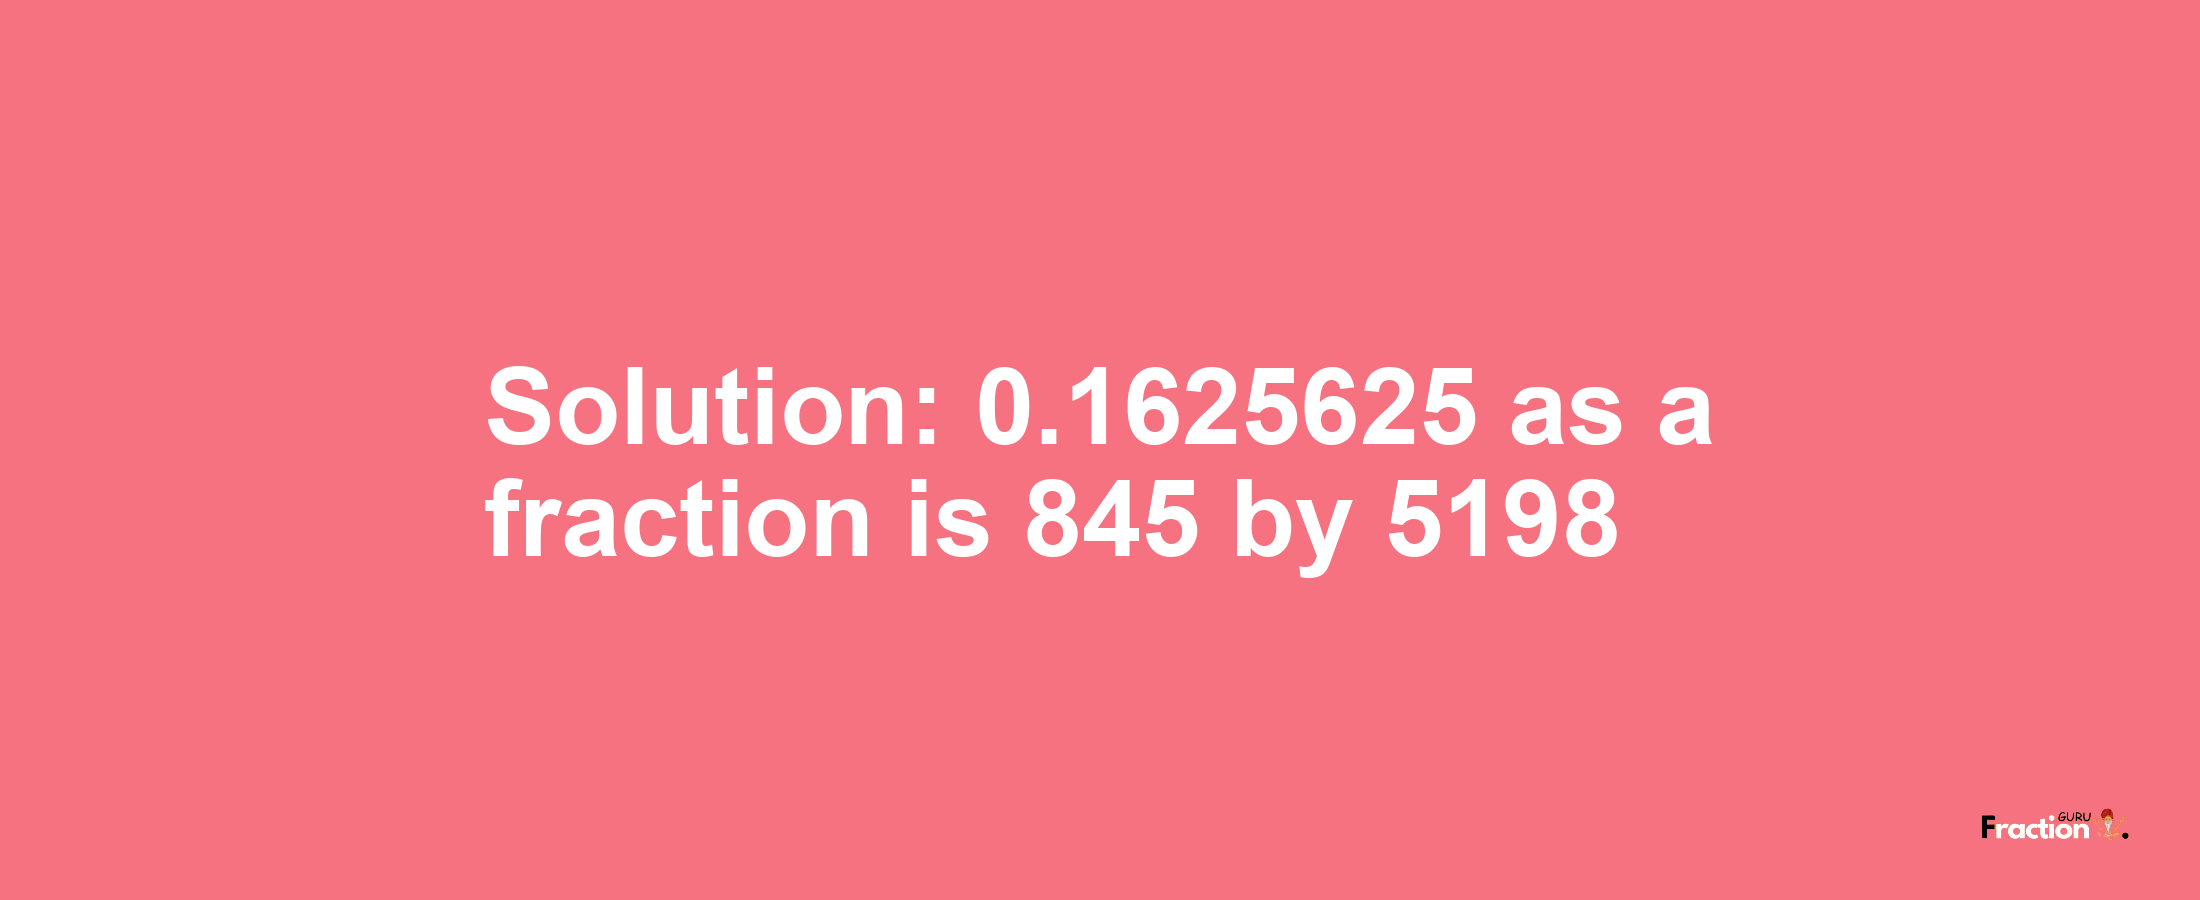 Solution:0.1625625 as a fraction is 845/5198